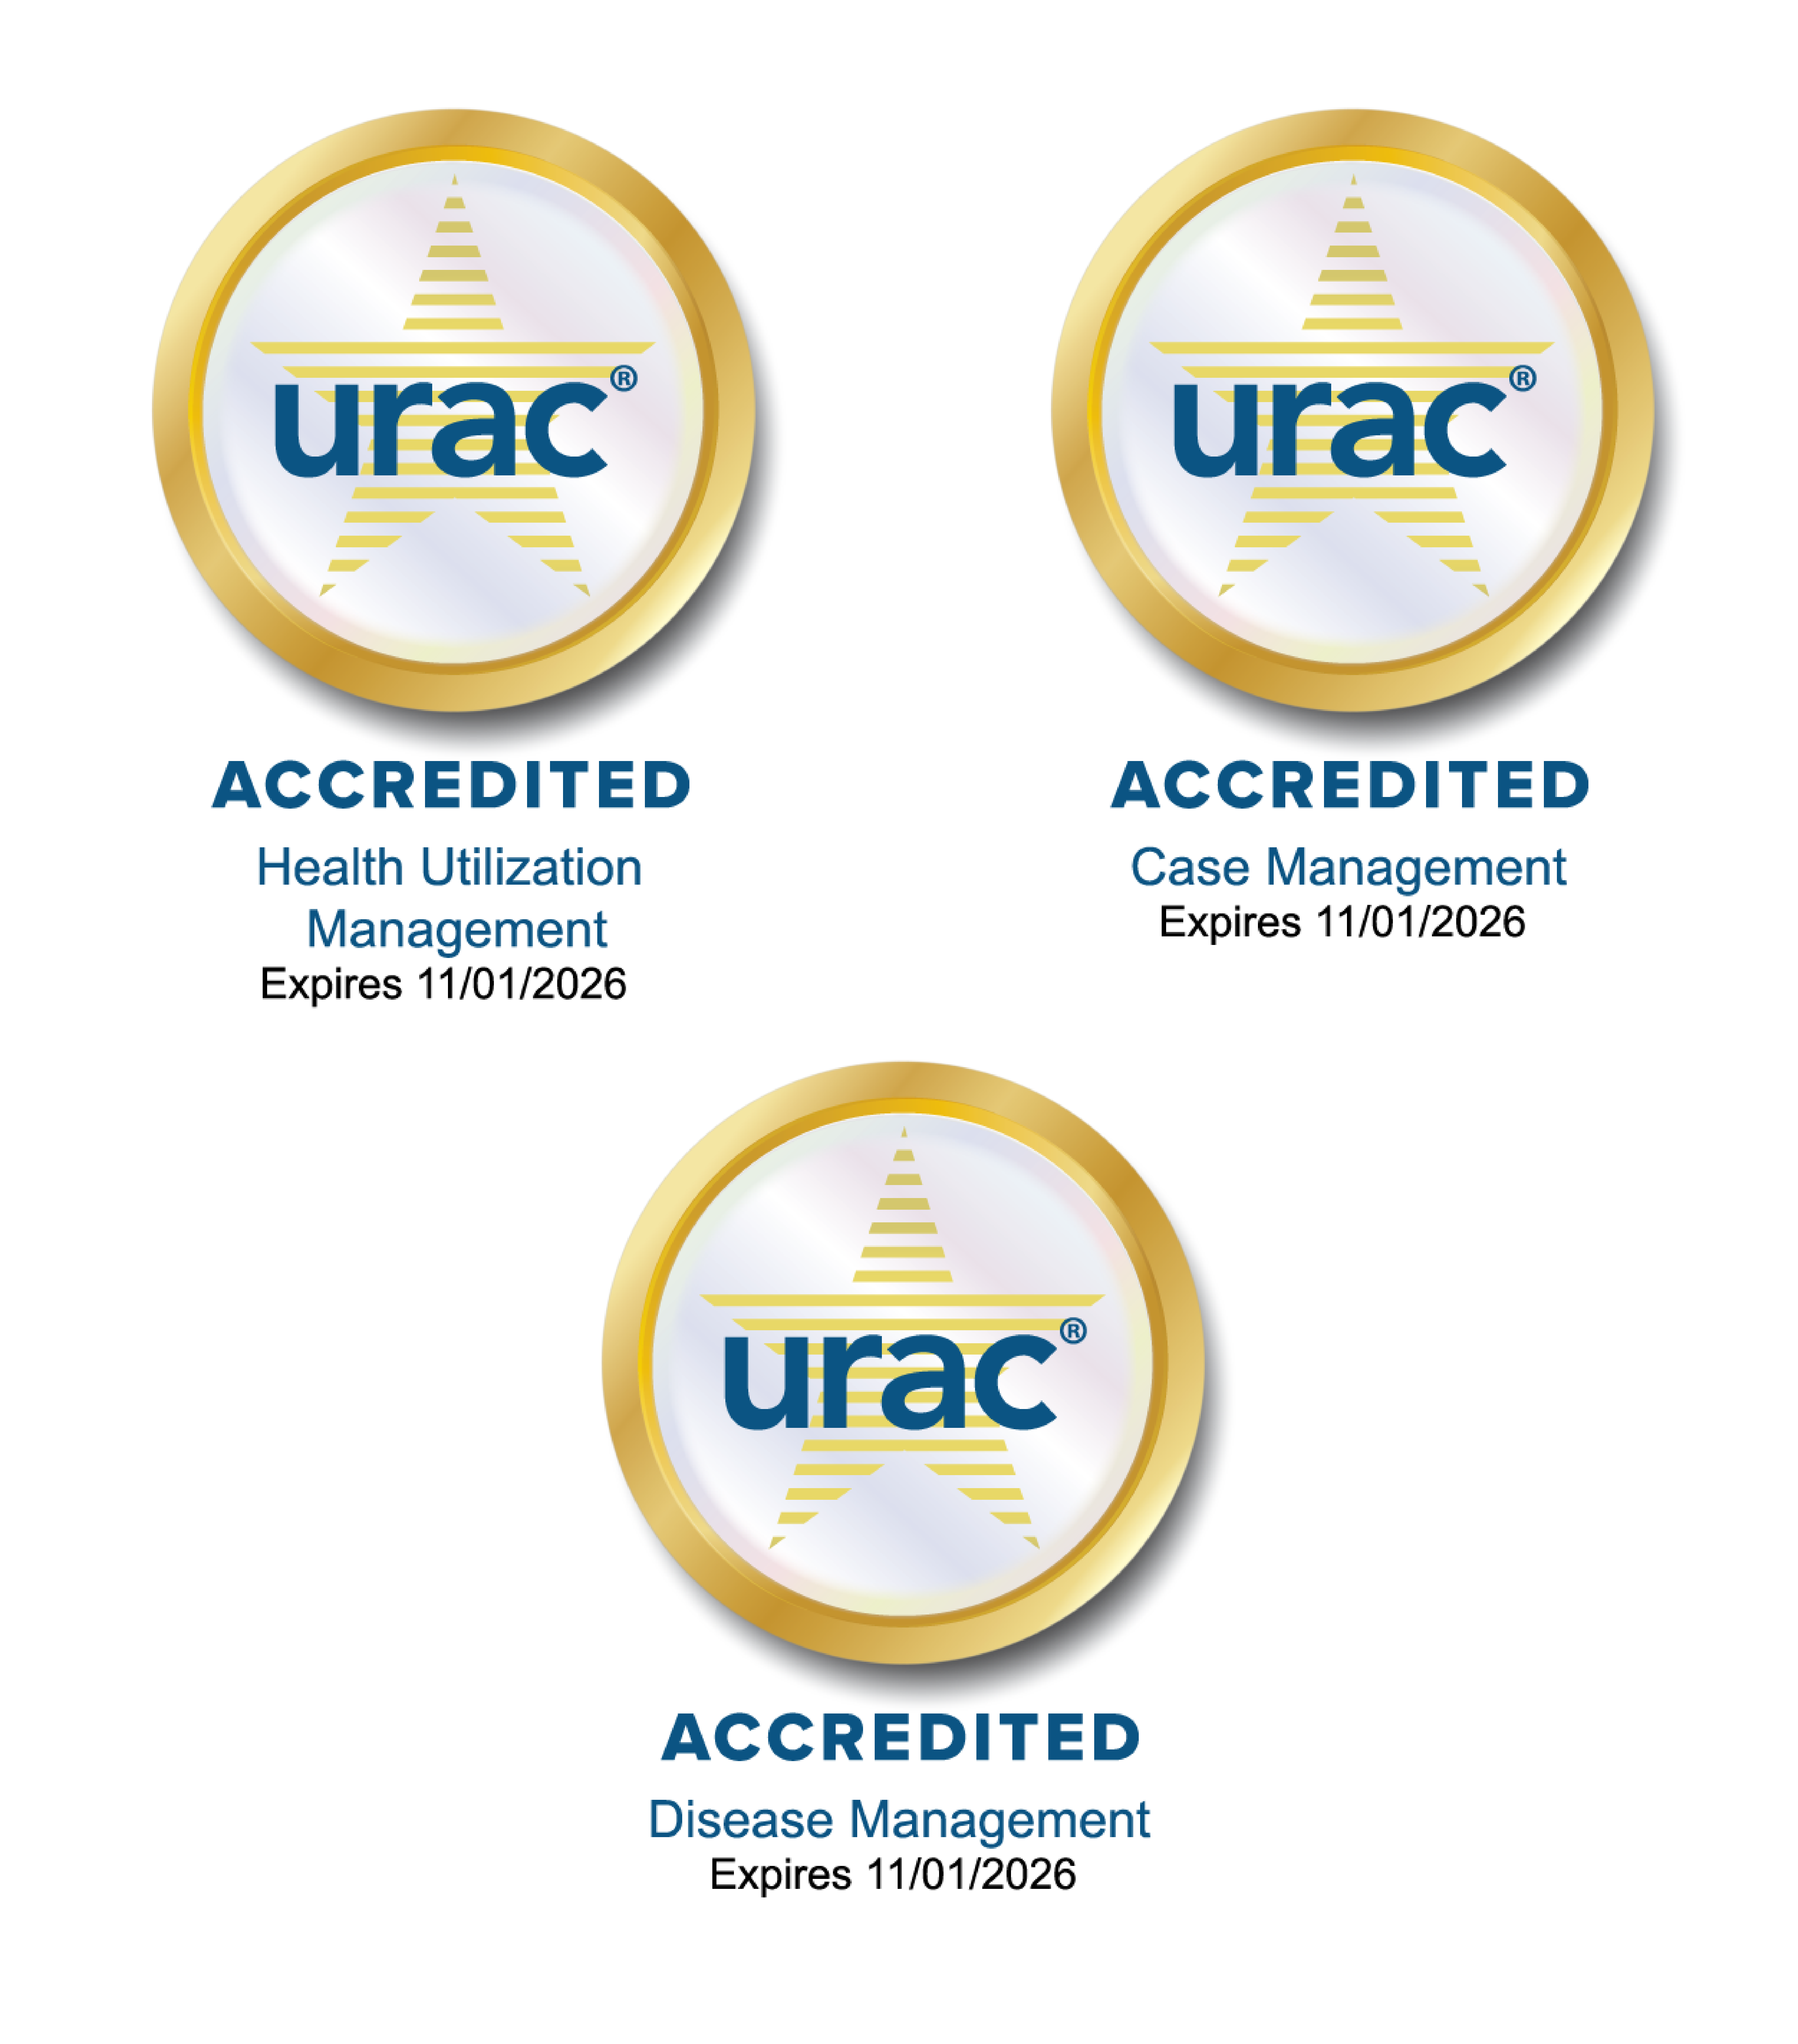 American Health Holding is accredited by URAC